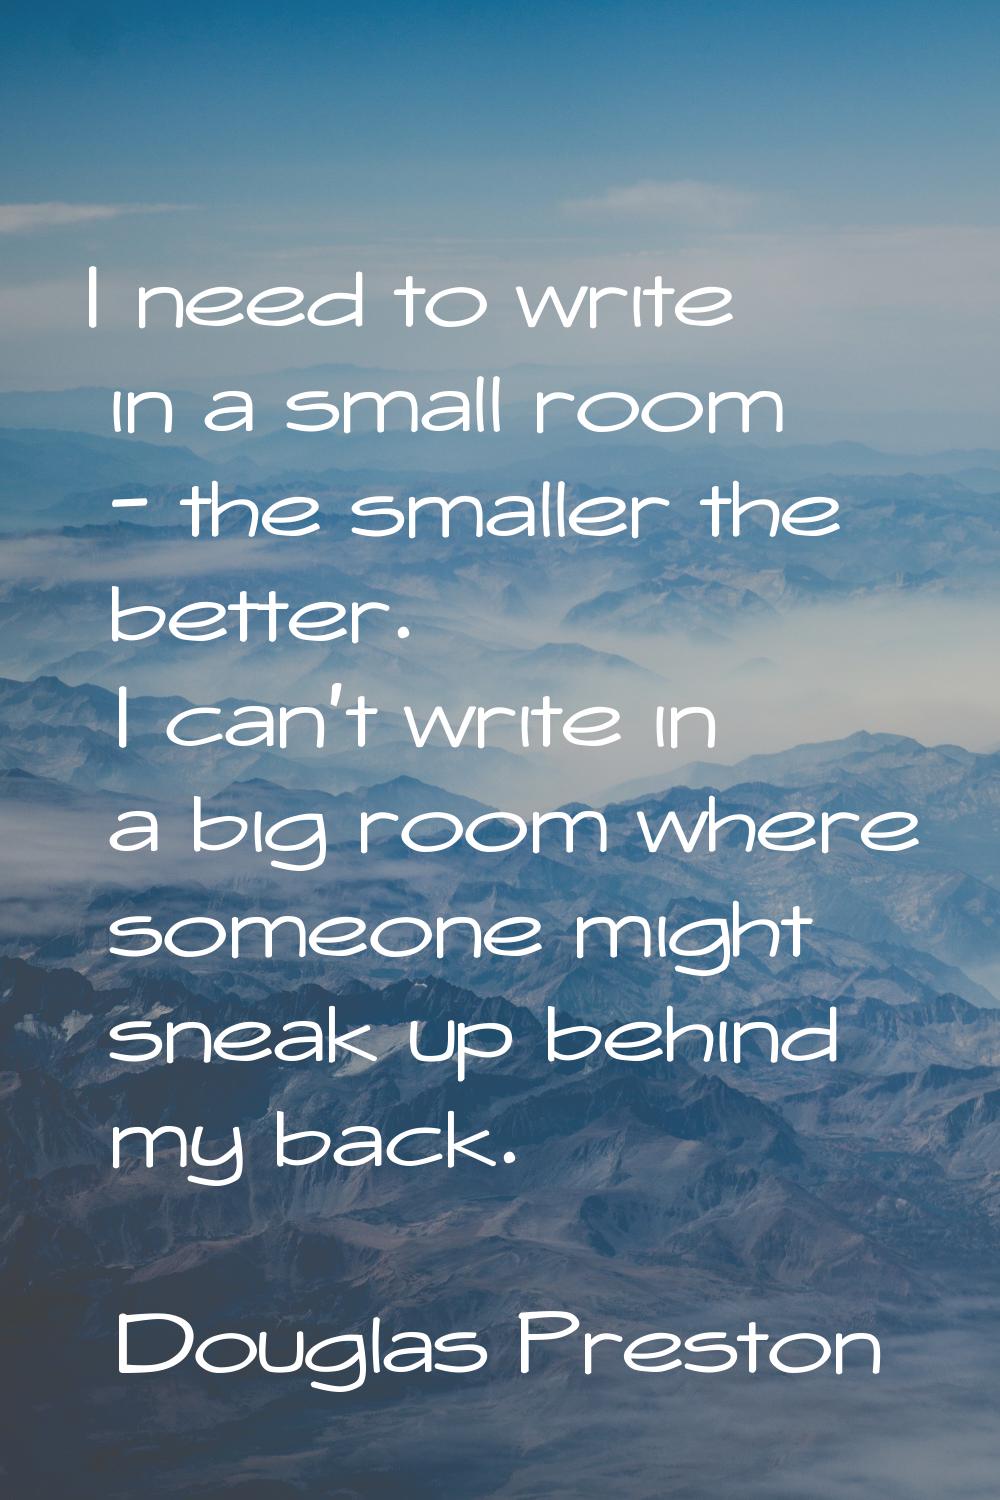 I need to write in a small room - the smaller the better. I can't write in a big room where someone